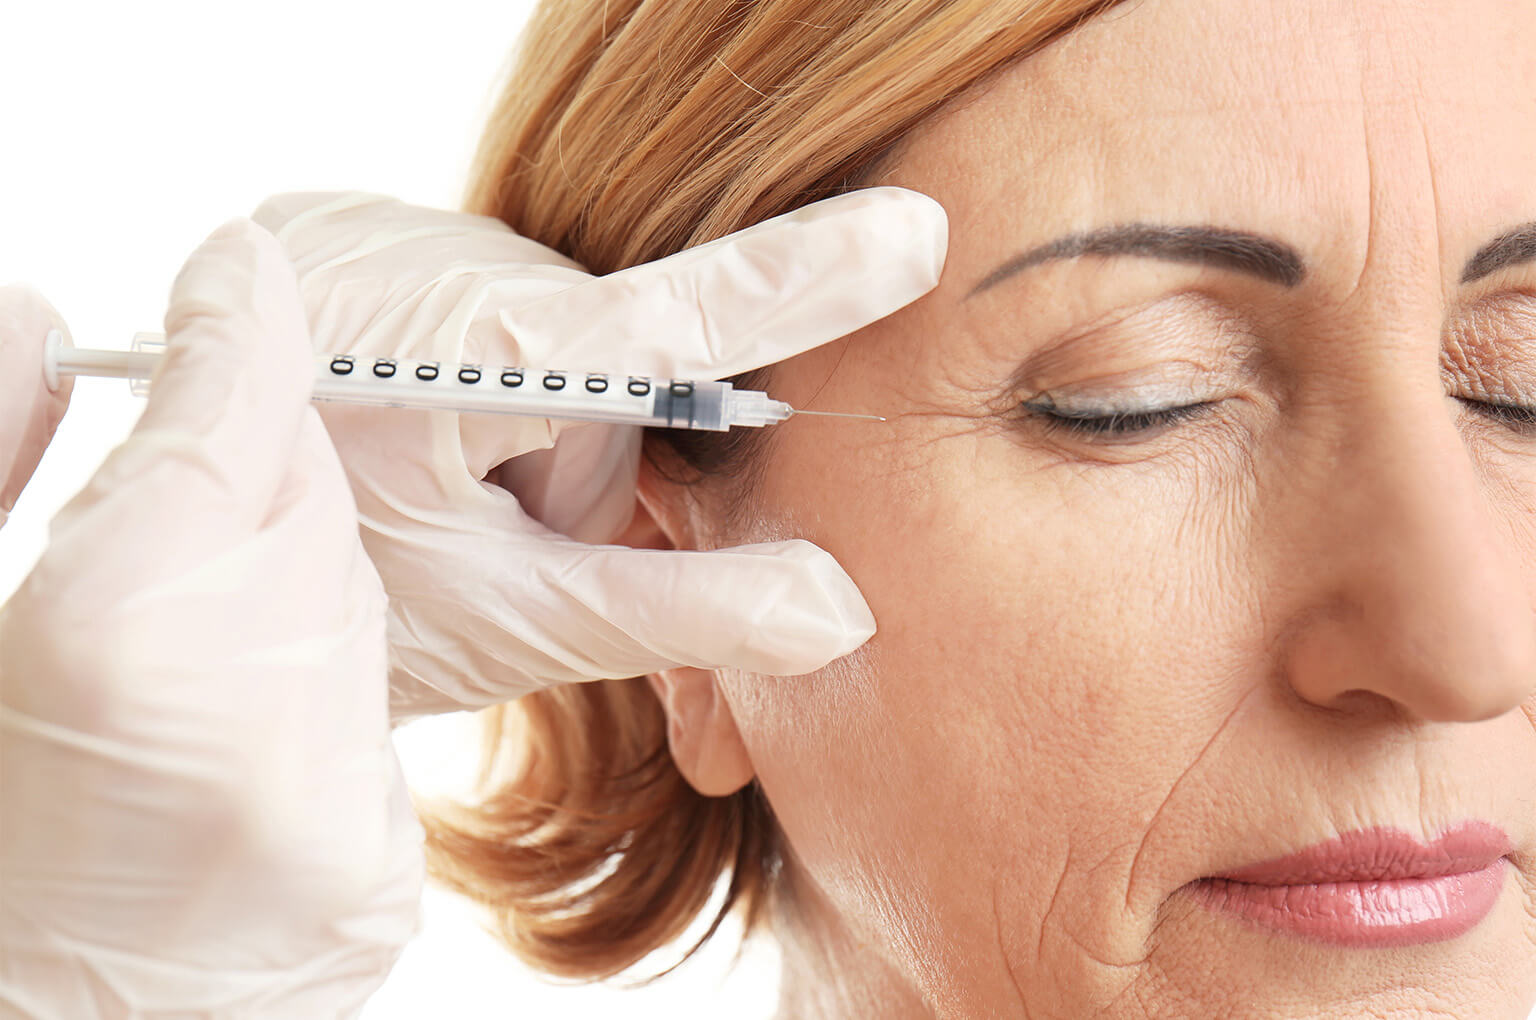 Six benefits of using Botox for forehead and facial wrinkles